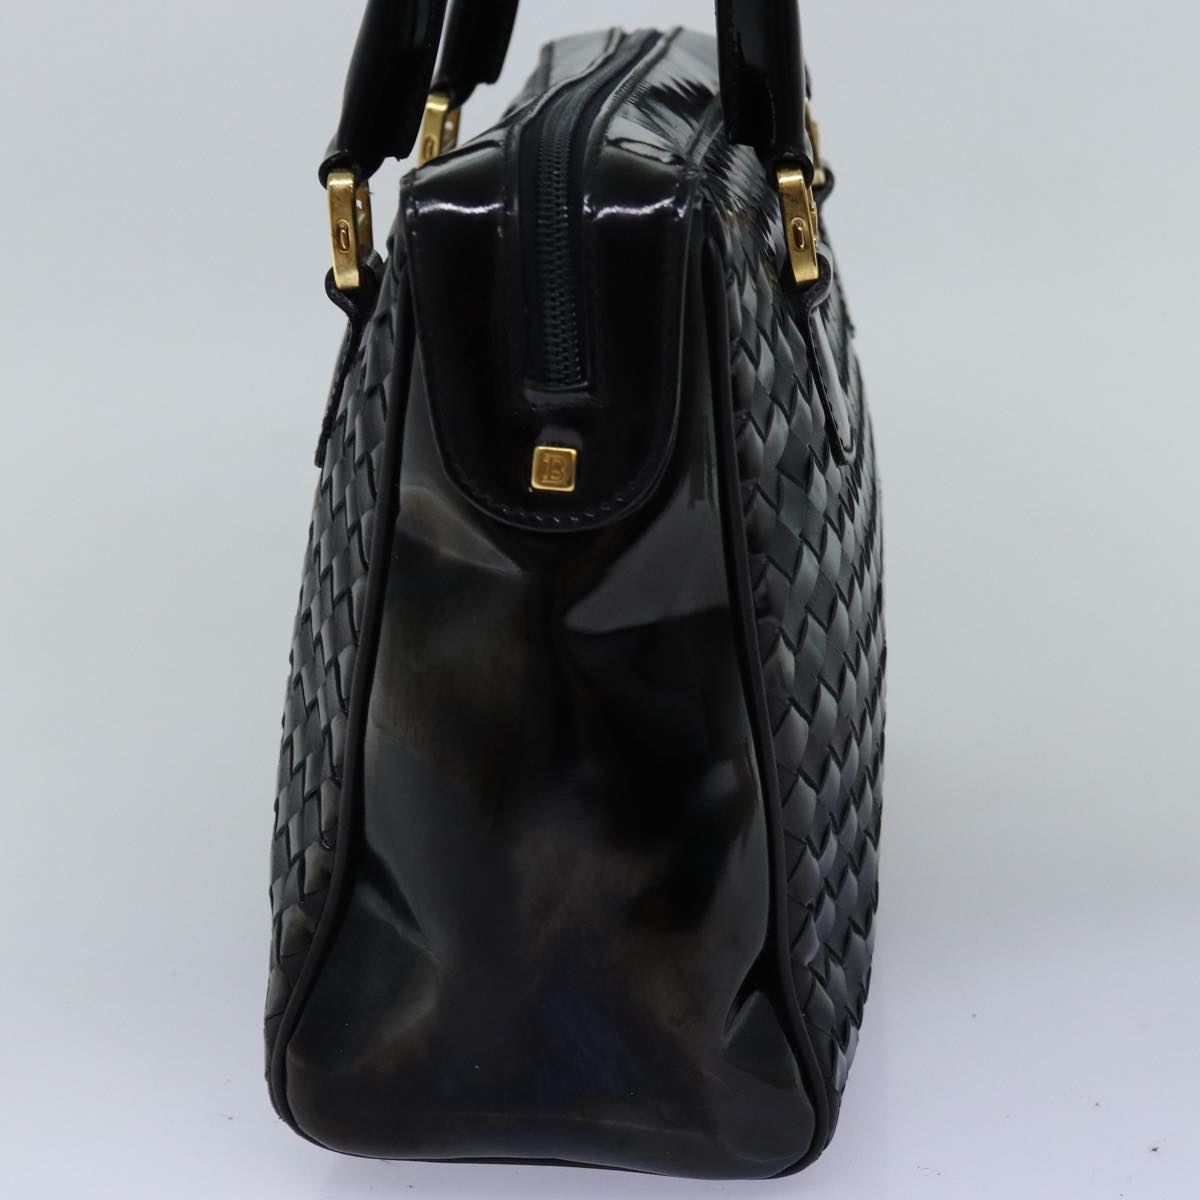 BALLY Hand Bag Patent leather Black Auth bs14103